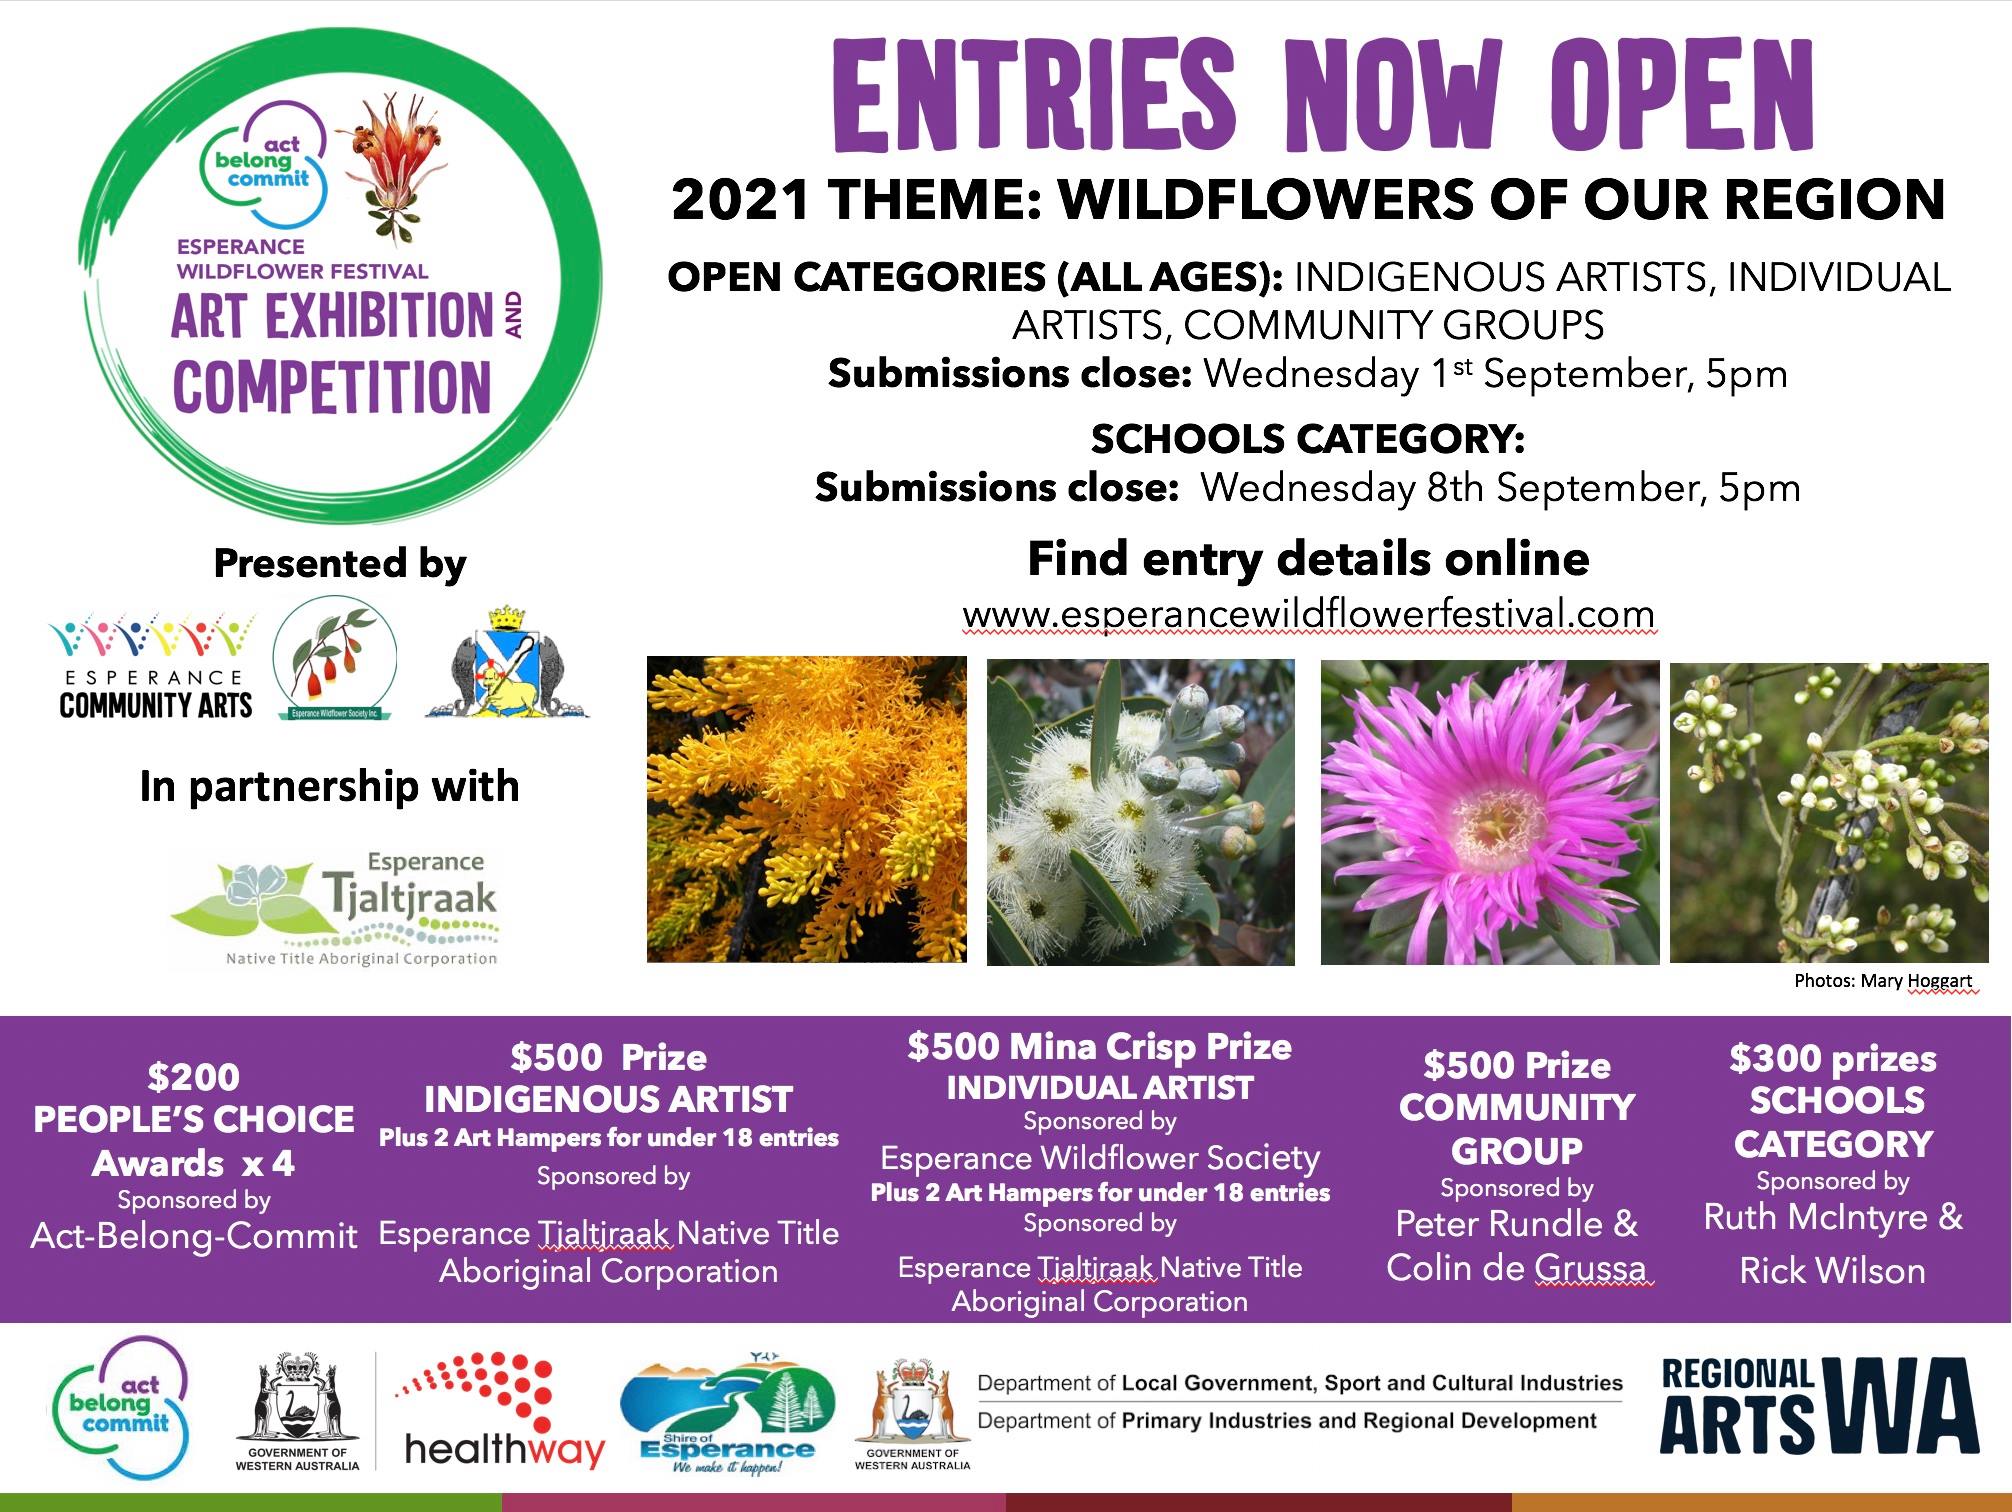 2021 Act-Belong-Commit Esperance Wildflower Festival Art Exhibition and Competition